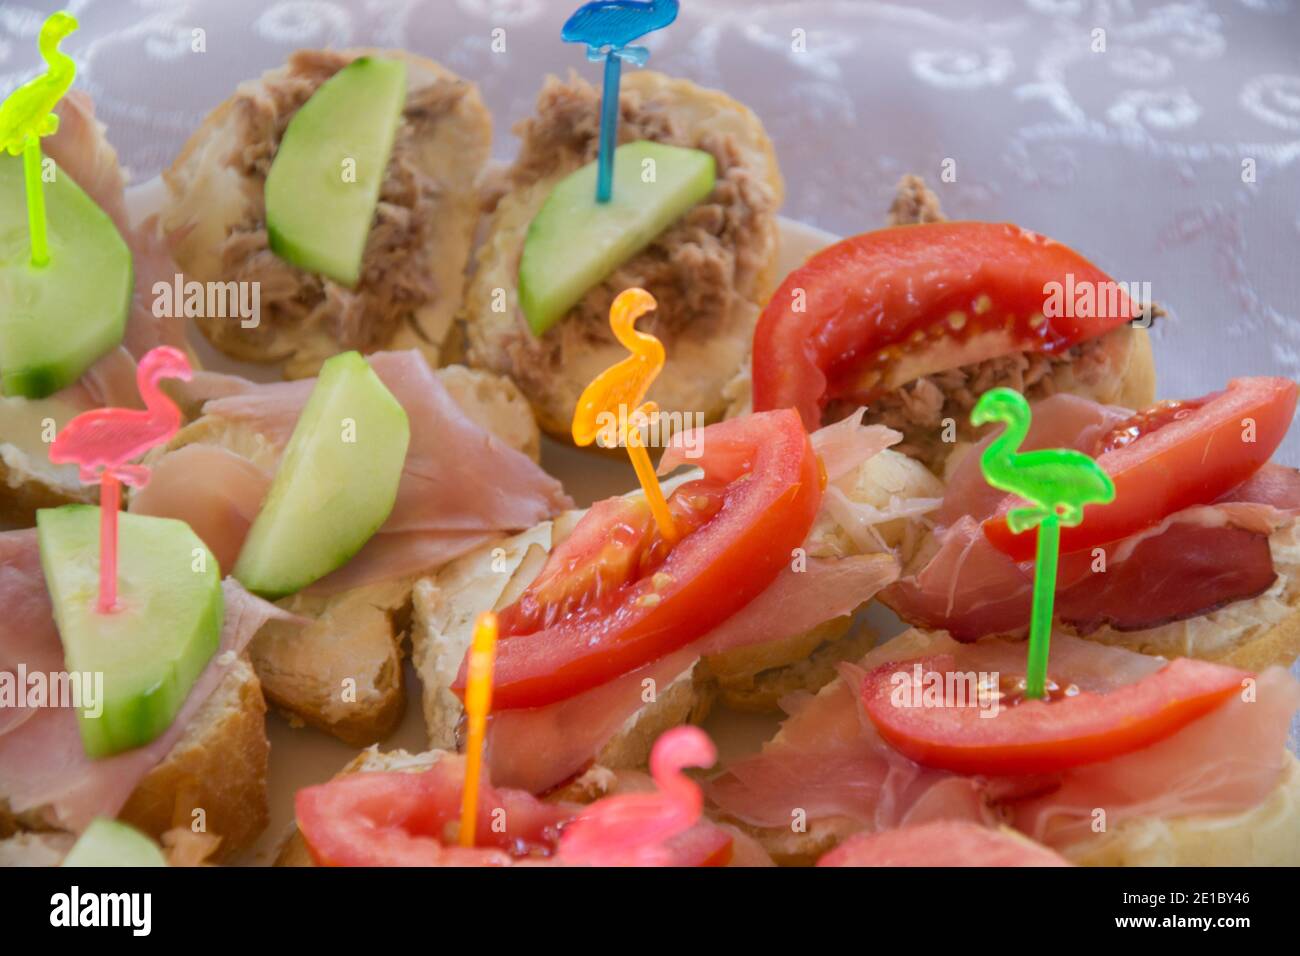 Healthy sandwiches with ham, tomato and cucumbers on a plate, decorated with plastic sticks with colorful flamingos, party concepts, appetizers Stock Photo